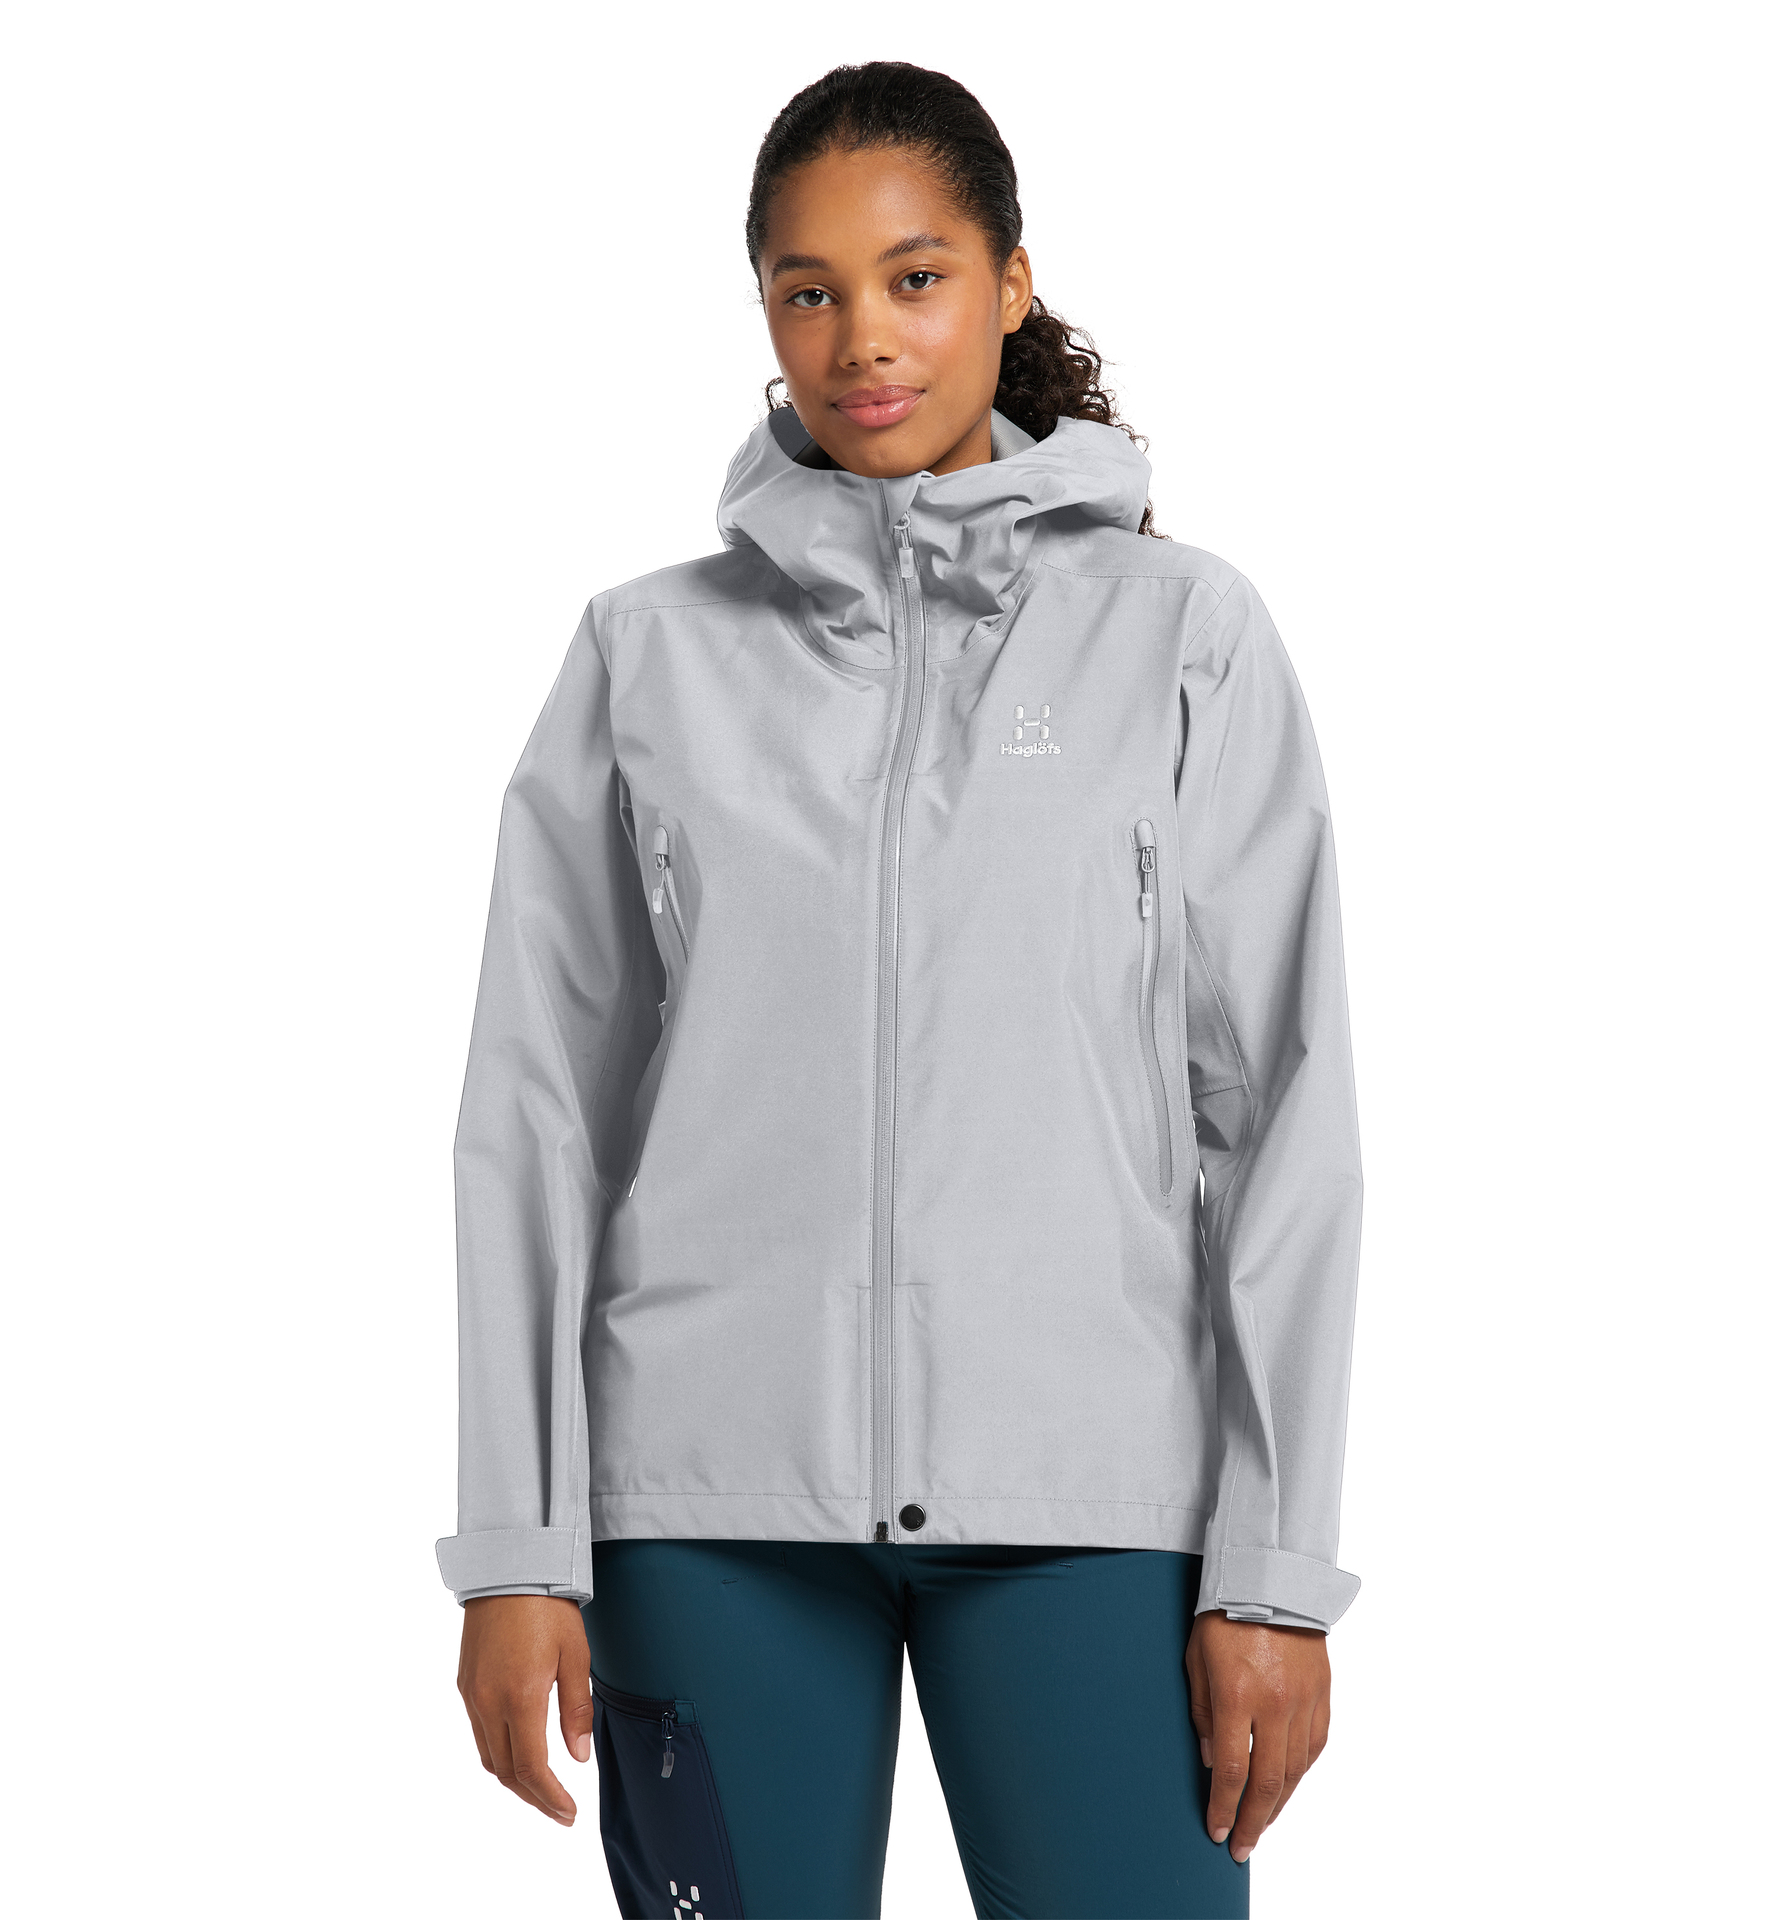 Buy a Paramo Women's Alize Windproof Jacket from The Mountaineer, Paramo  Premier Retailer